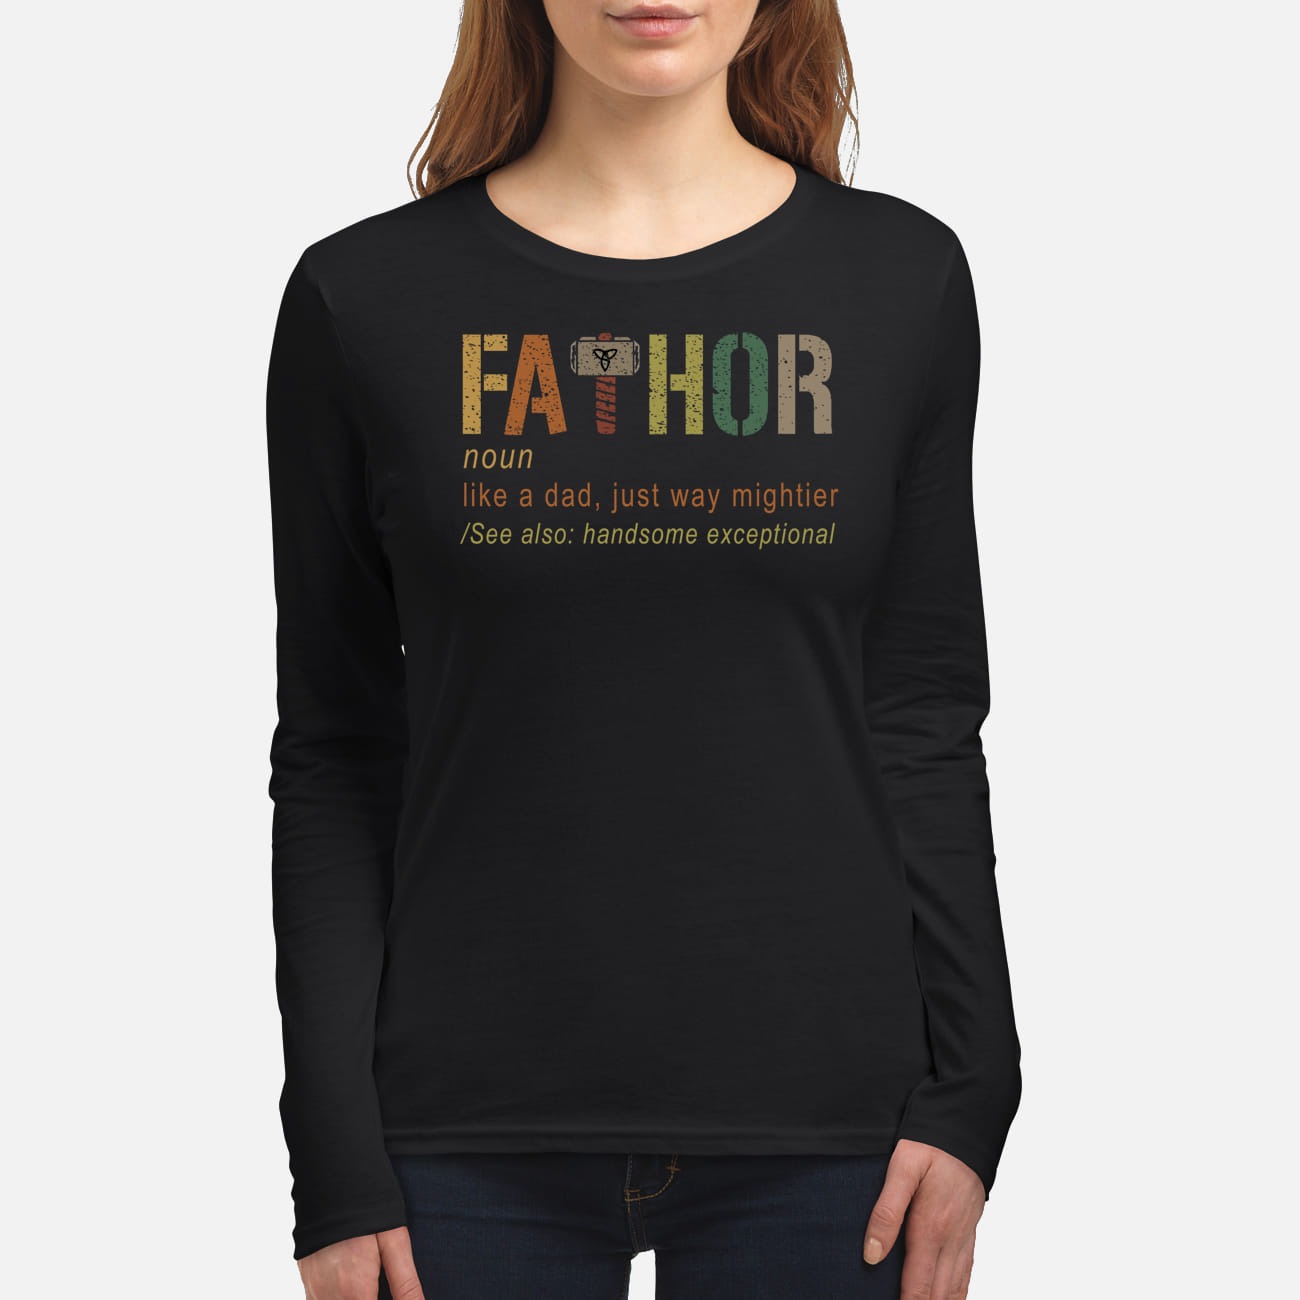 Fathor like a dad just way mightier women's long sleeved shirt